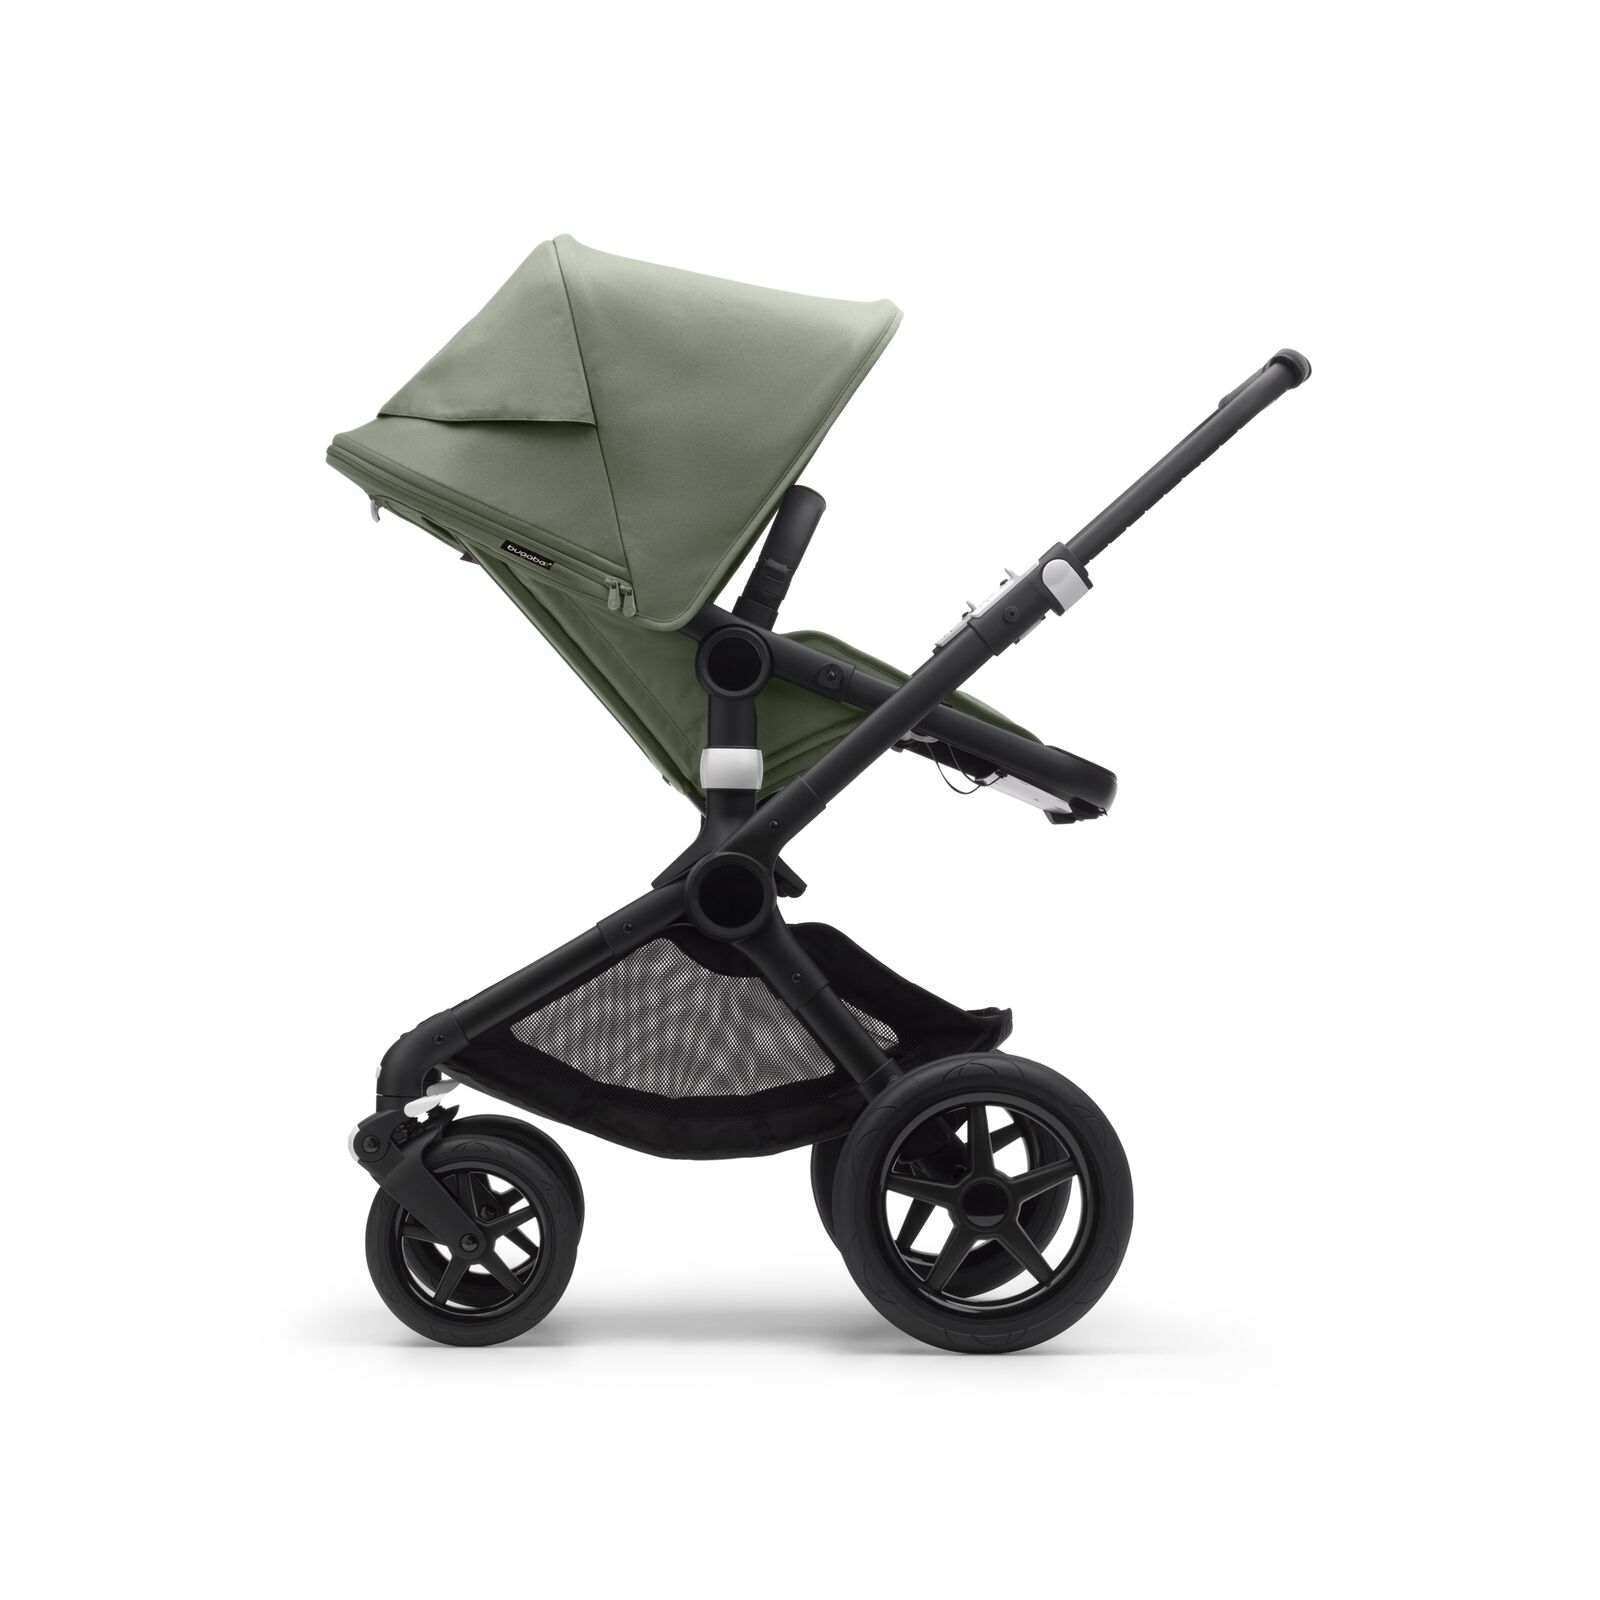 Side view of a Bugaboo Fox 3 seat stroller with black frame, forest green fabrics, and forest green sun canopy.